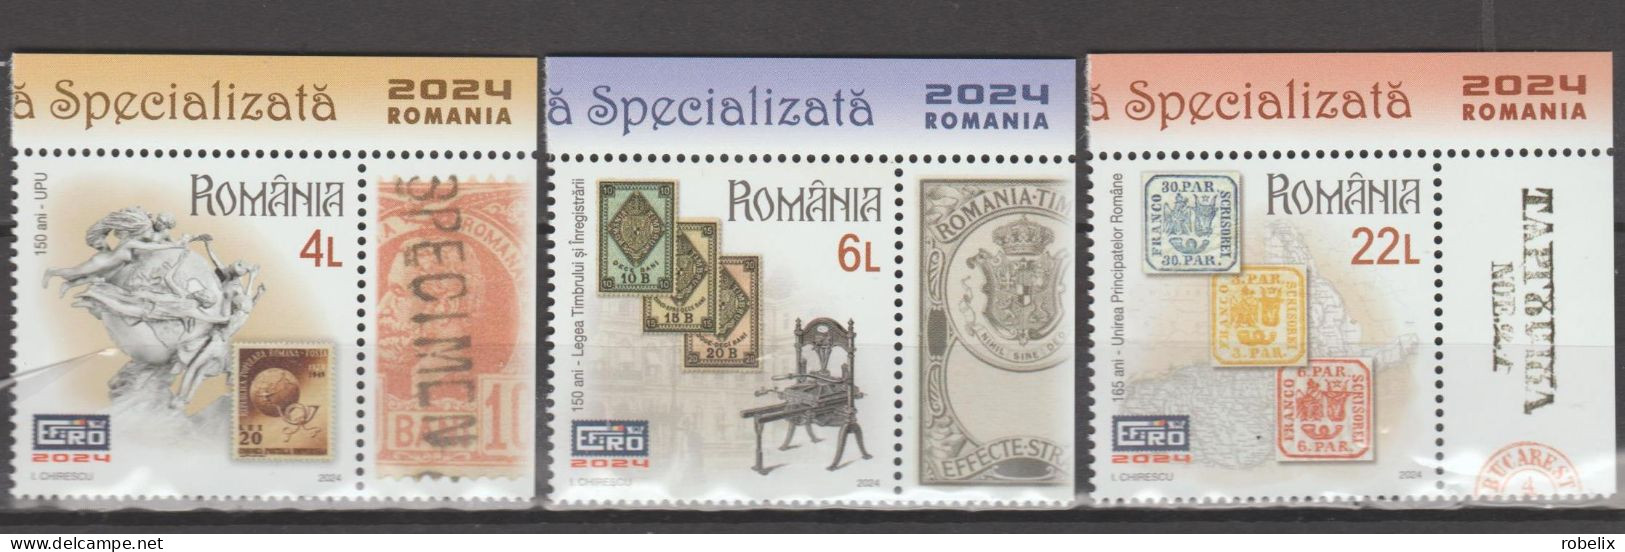 ROMANIA 2024 EFIRO - WORLD STAMP EXHIBITION IN BUCHAREST Set Of 3 Stamps With Tabs  MNH** - Esposizioni Filateliche